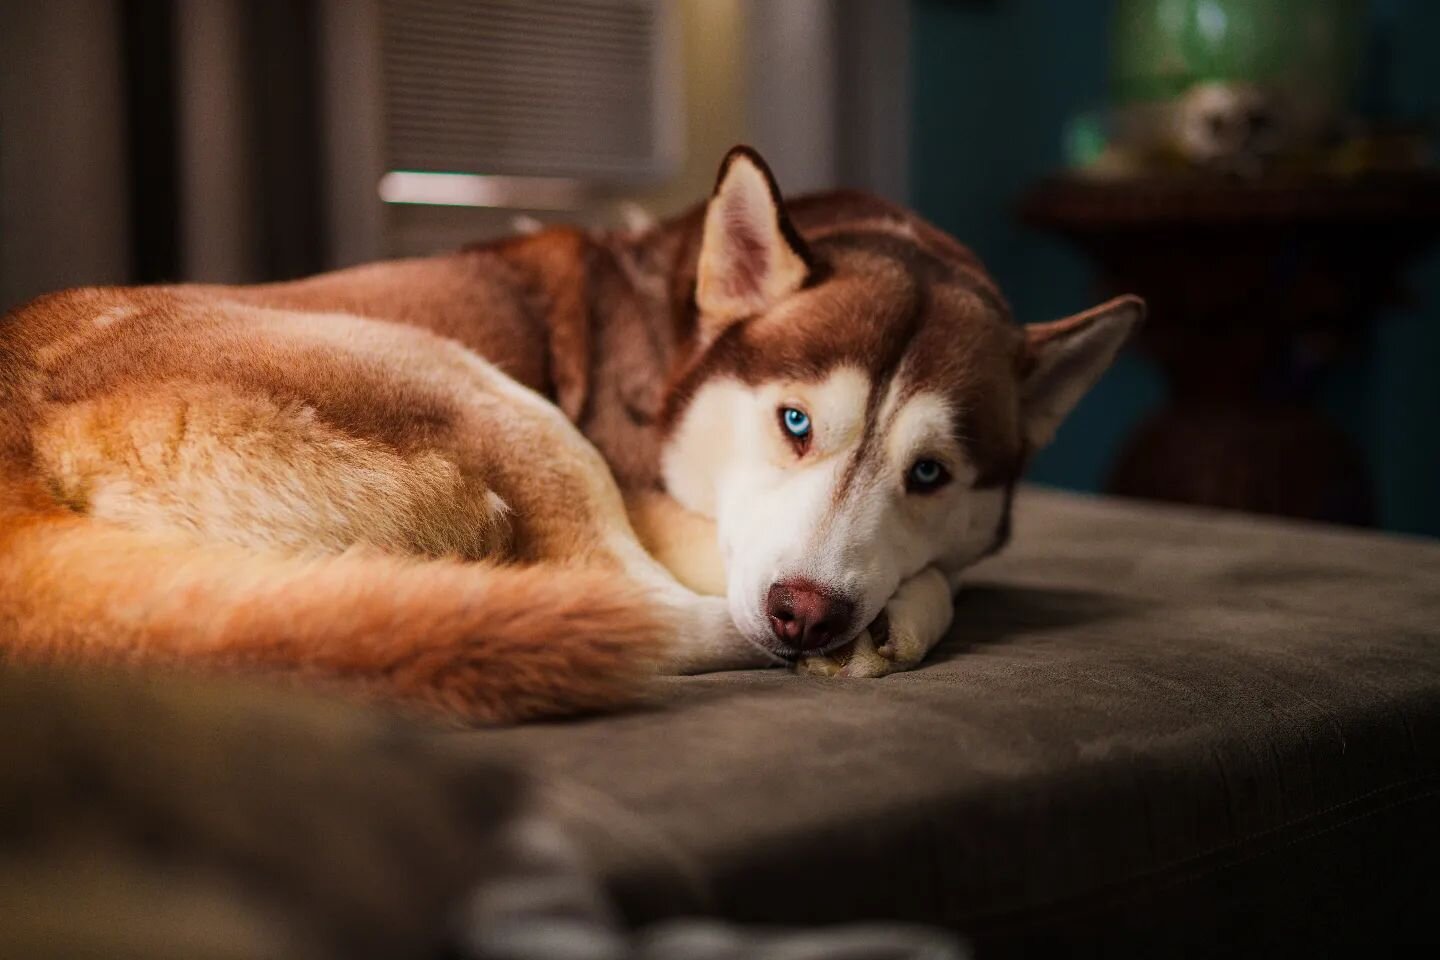 Focused intensity meets relaxed poise in this husky's world.  For pet portraits that bring out the unique spirit of your furry friends, contact us. #HuskyPortrait #PetPhotography #AnimalEyes #photography #instagood